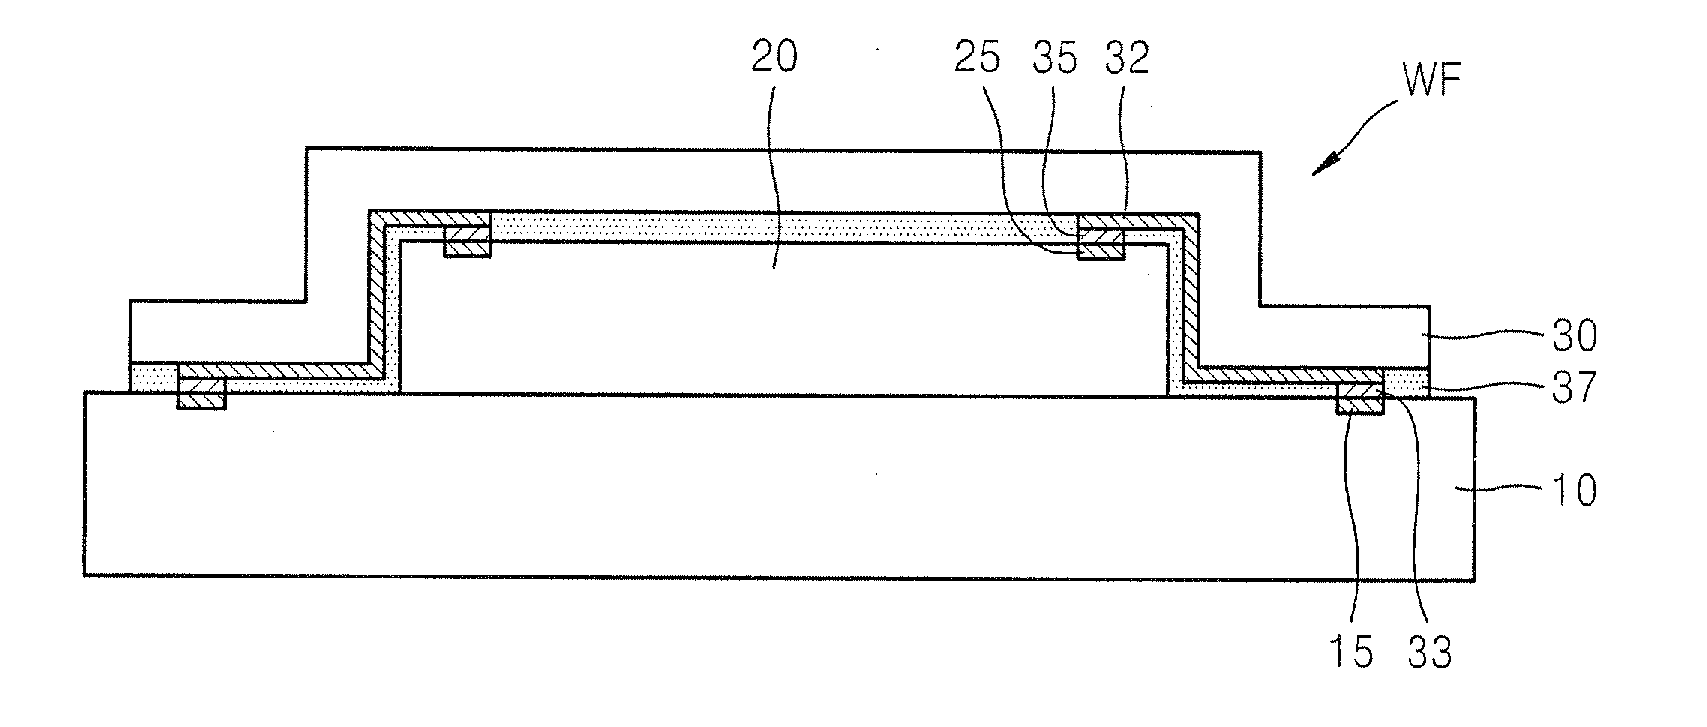 Wiring film having wire, semiconductor package including the wiring film, and method of fabricating the semiconductor package